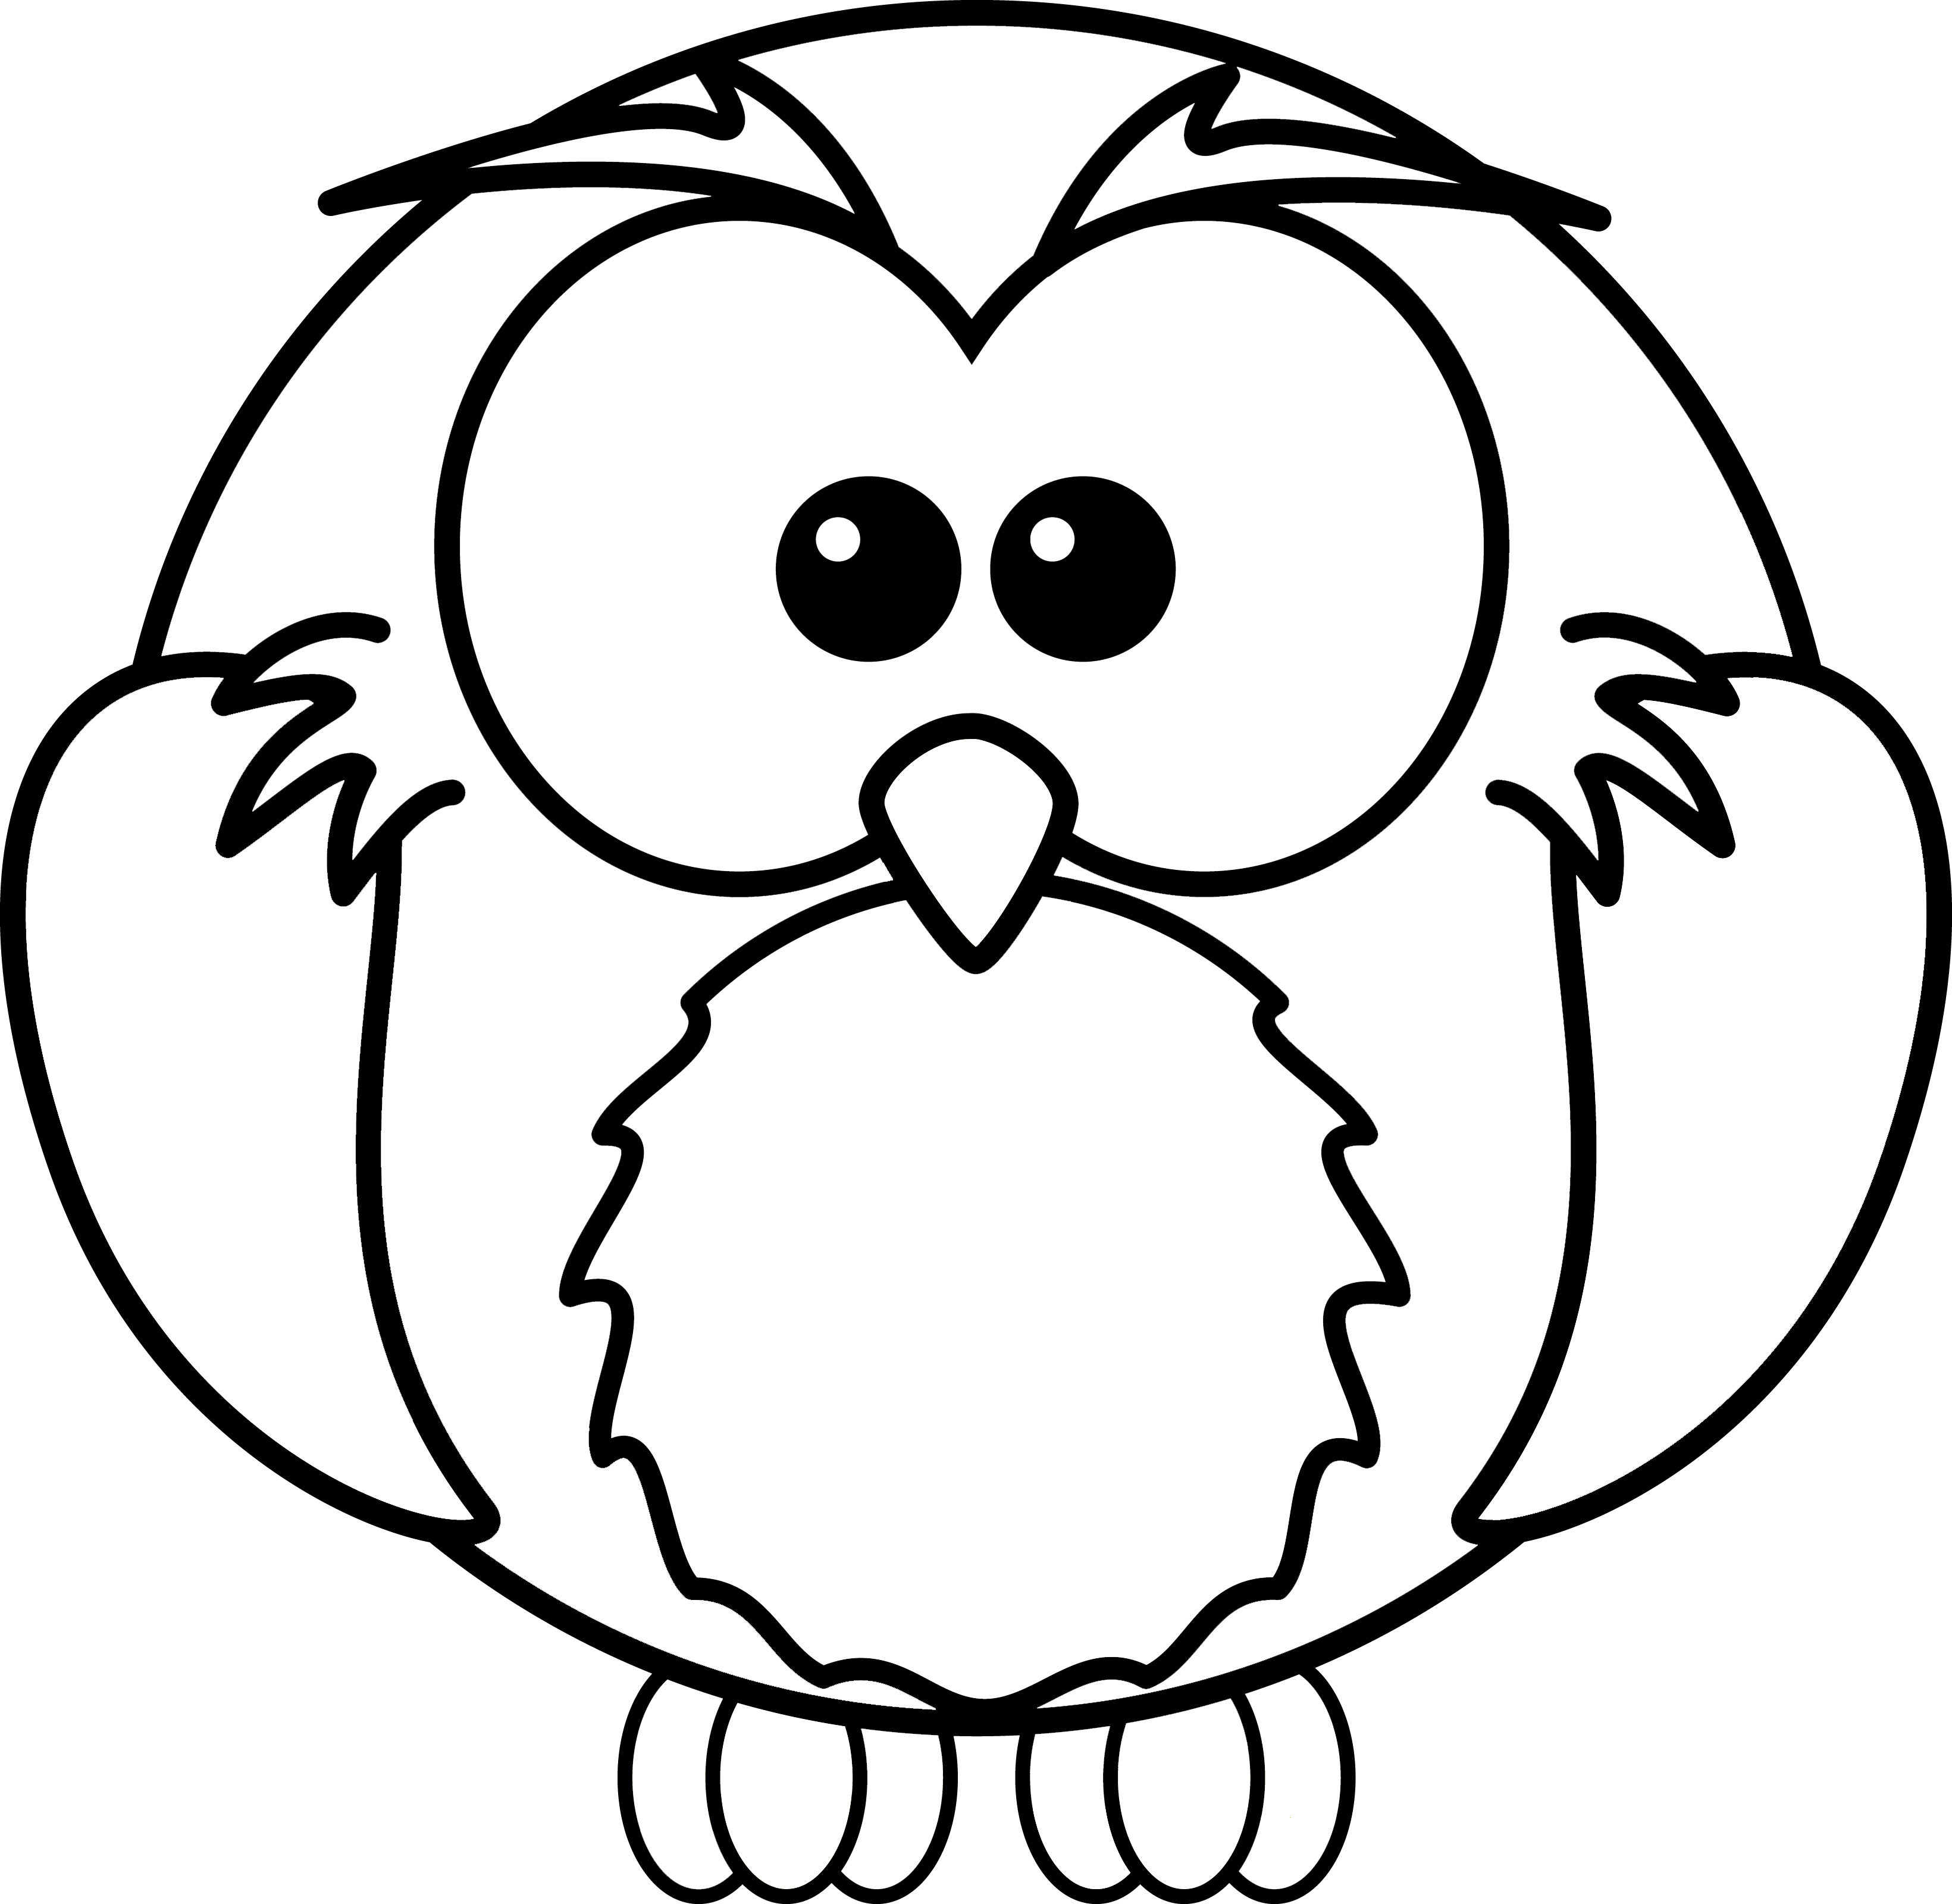 cartoon owl coloring page clipart | thingkid.